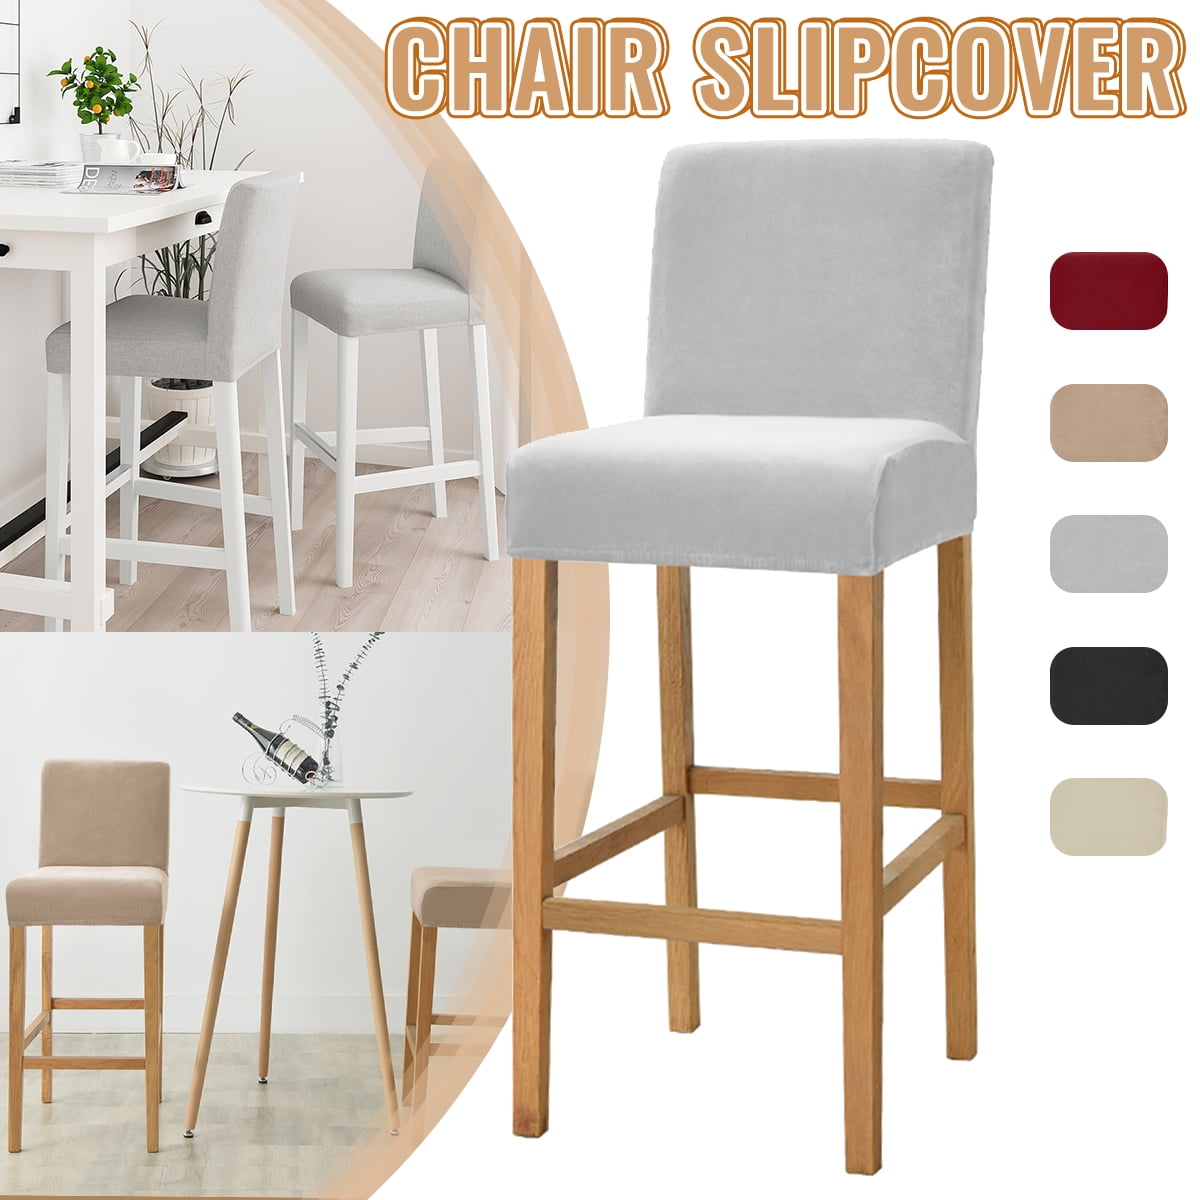 Stretch Dining Bar Stool Chair Covers Slipcovers Wedding Home Decor Seat Cover 